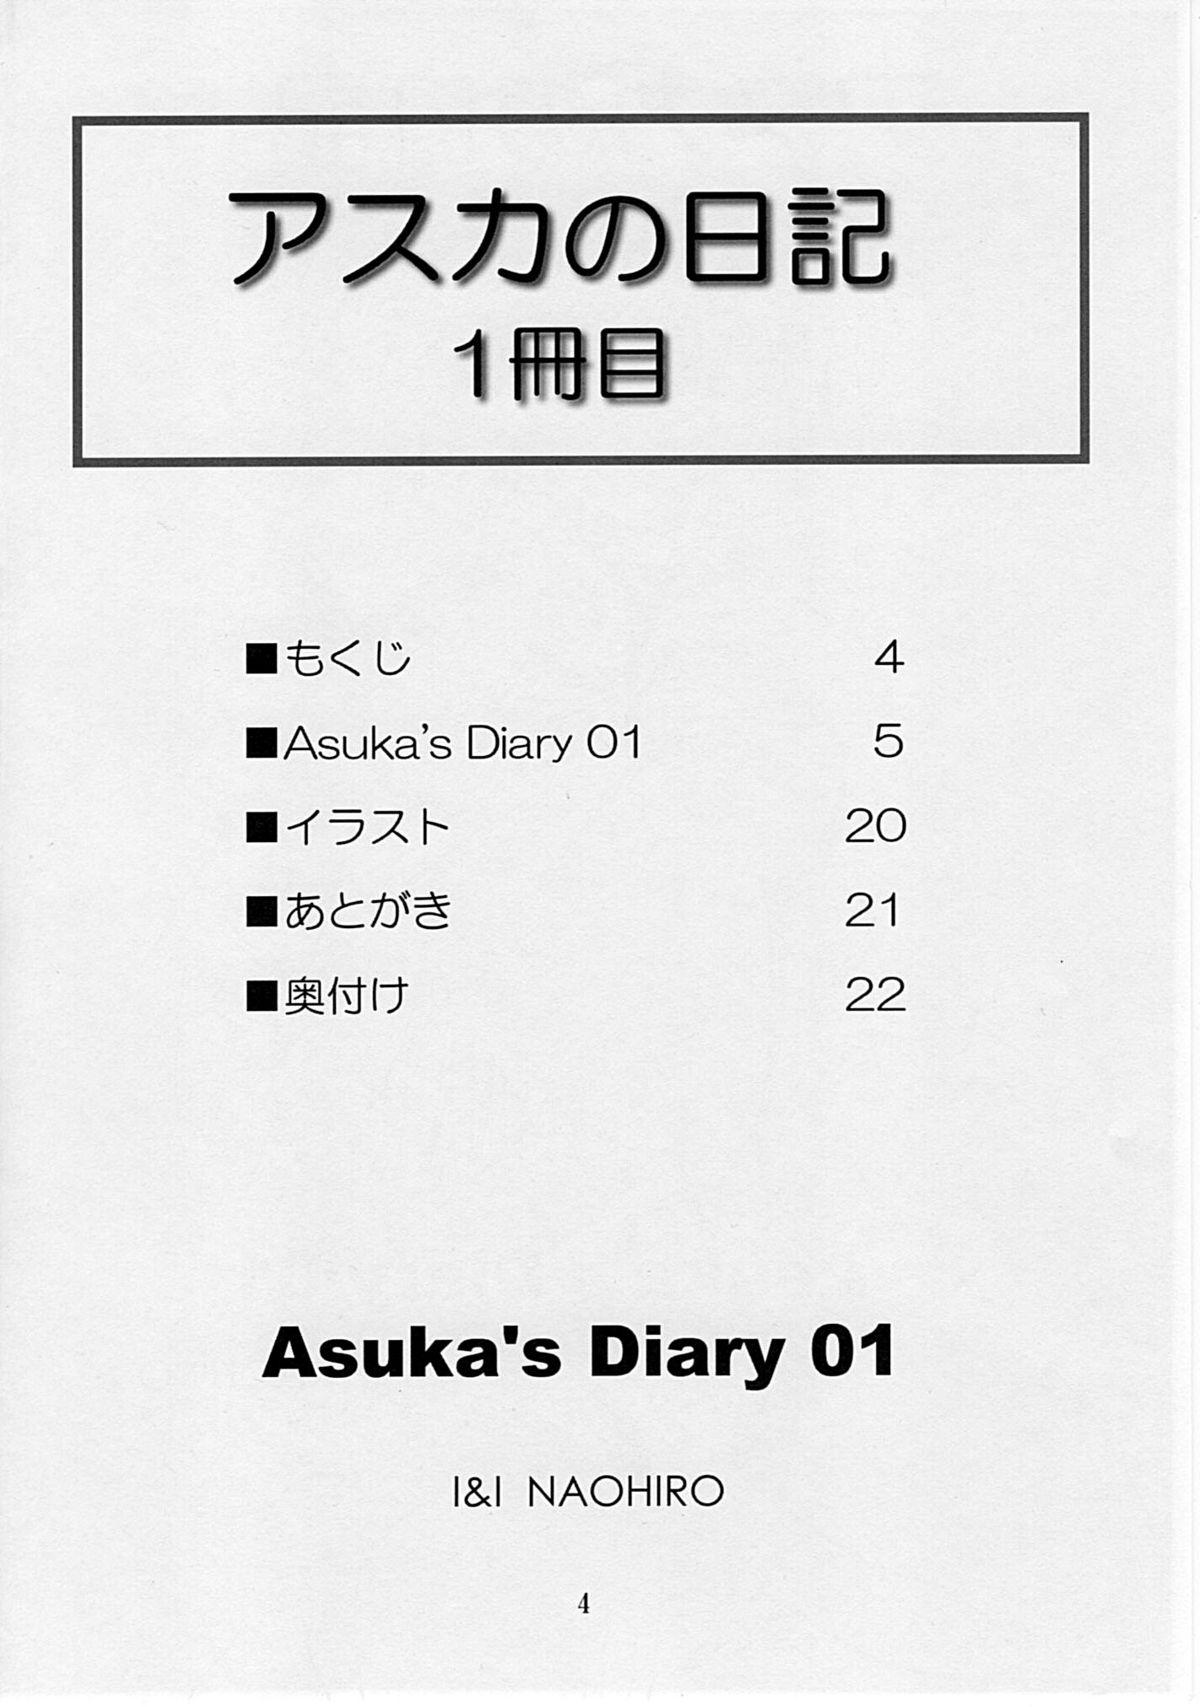 Sex Pussy Asuka's Diary 01 - Neon genesis evangelion Amateur Pussy - Page 3